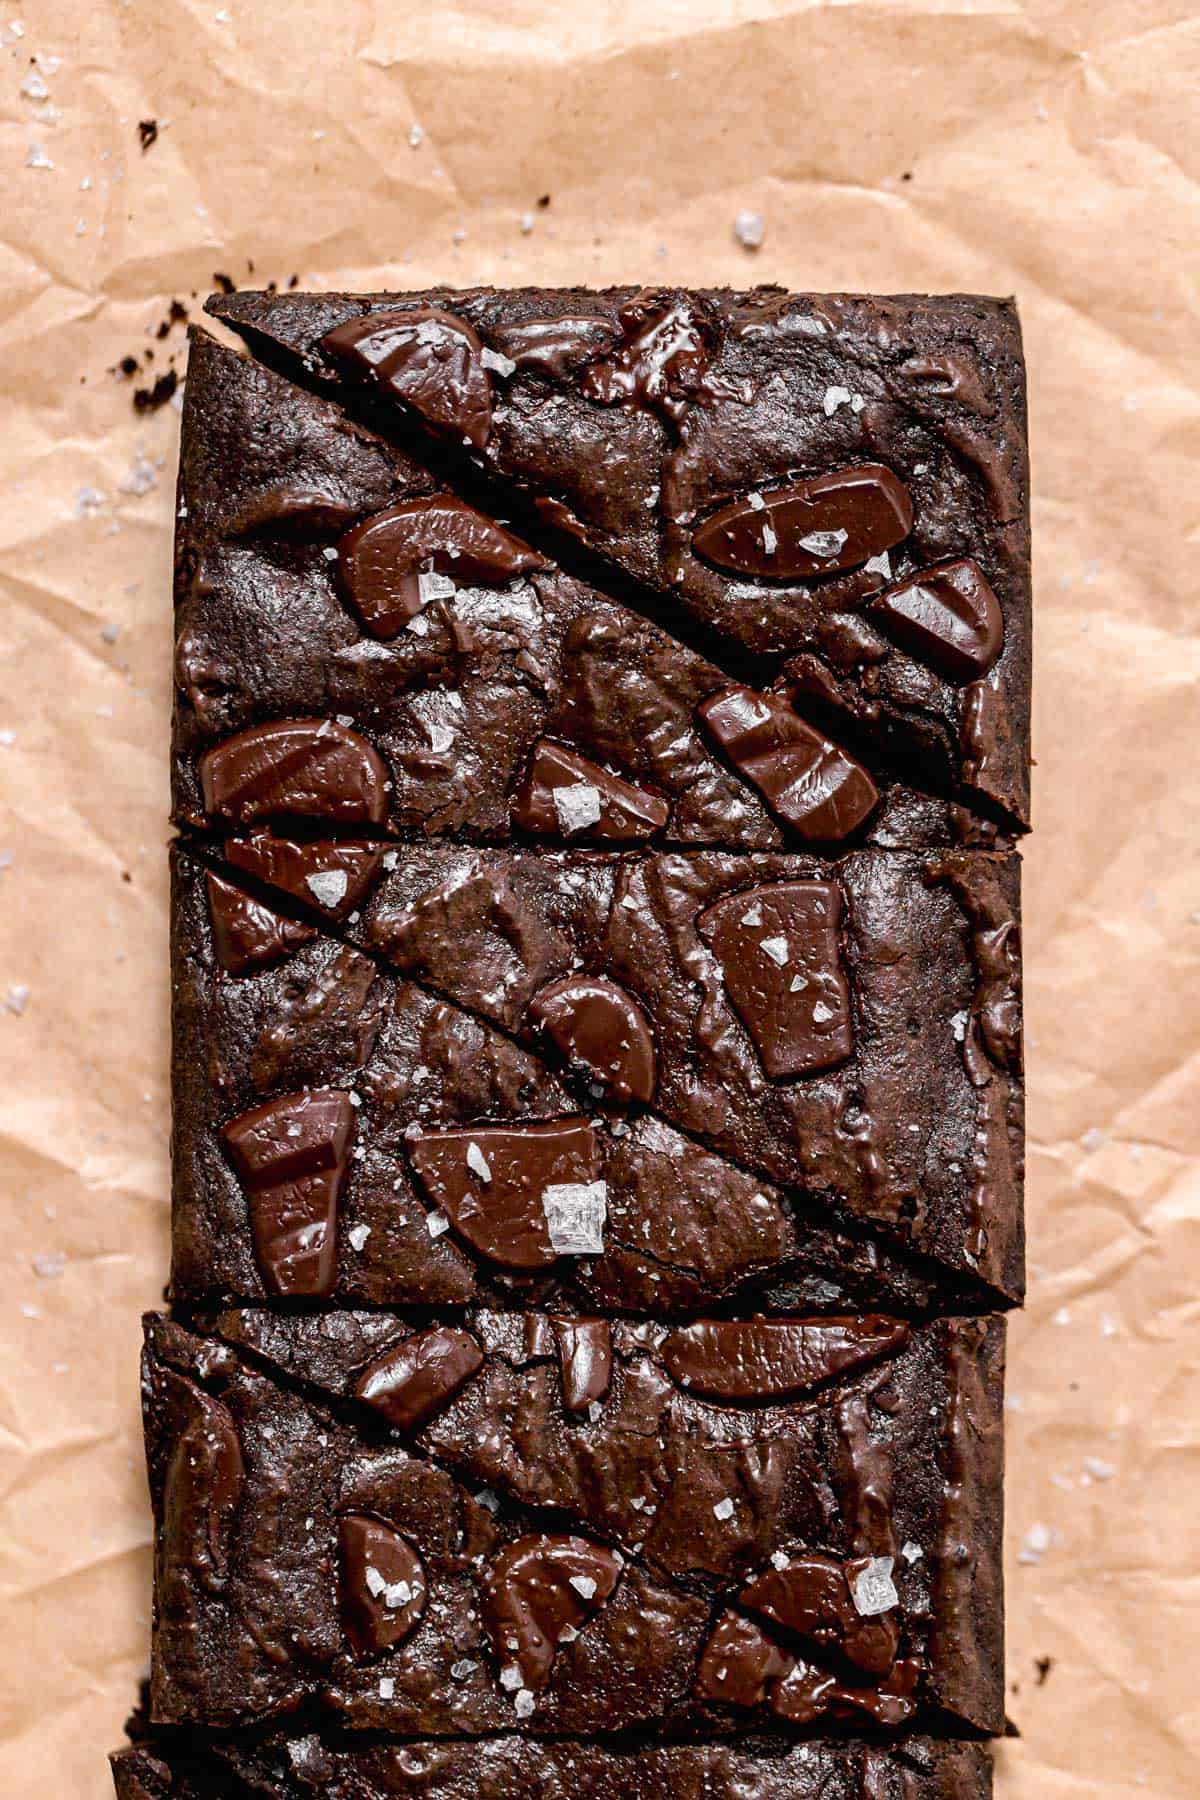 baked brownies cut into triangles